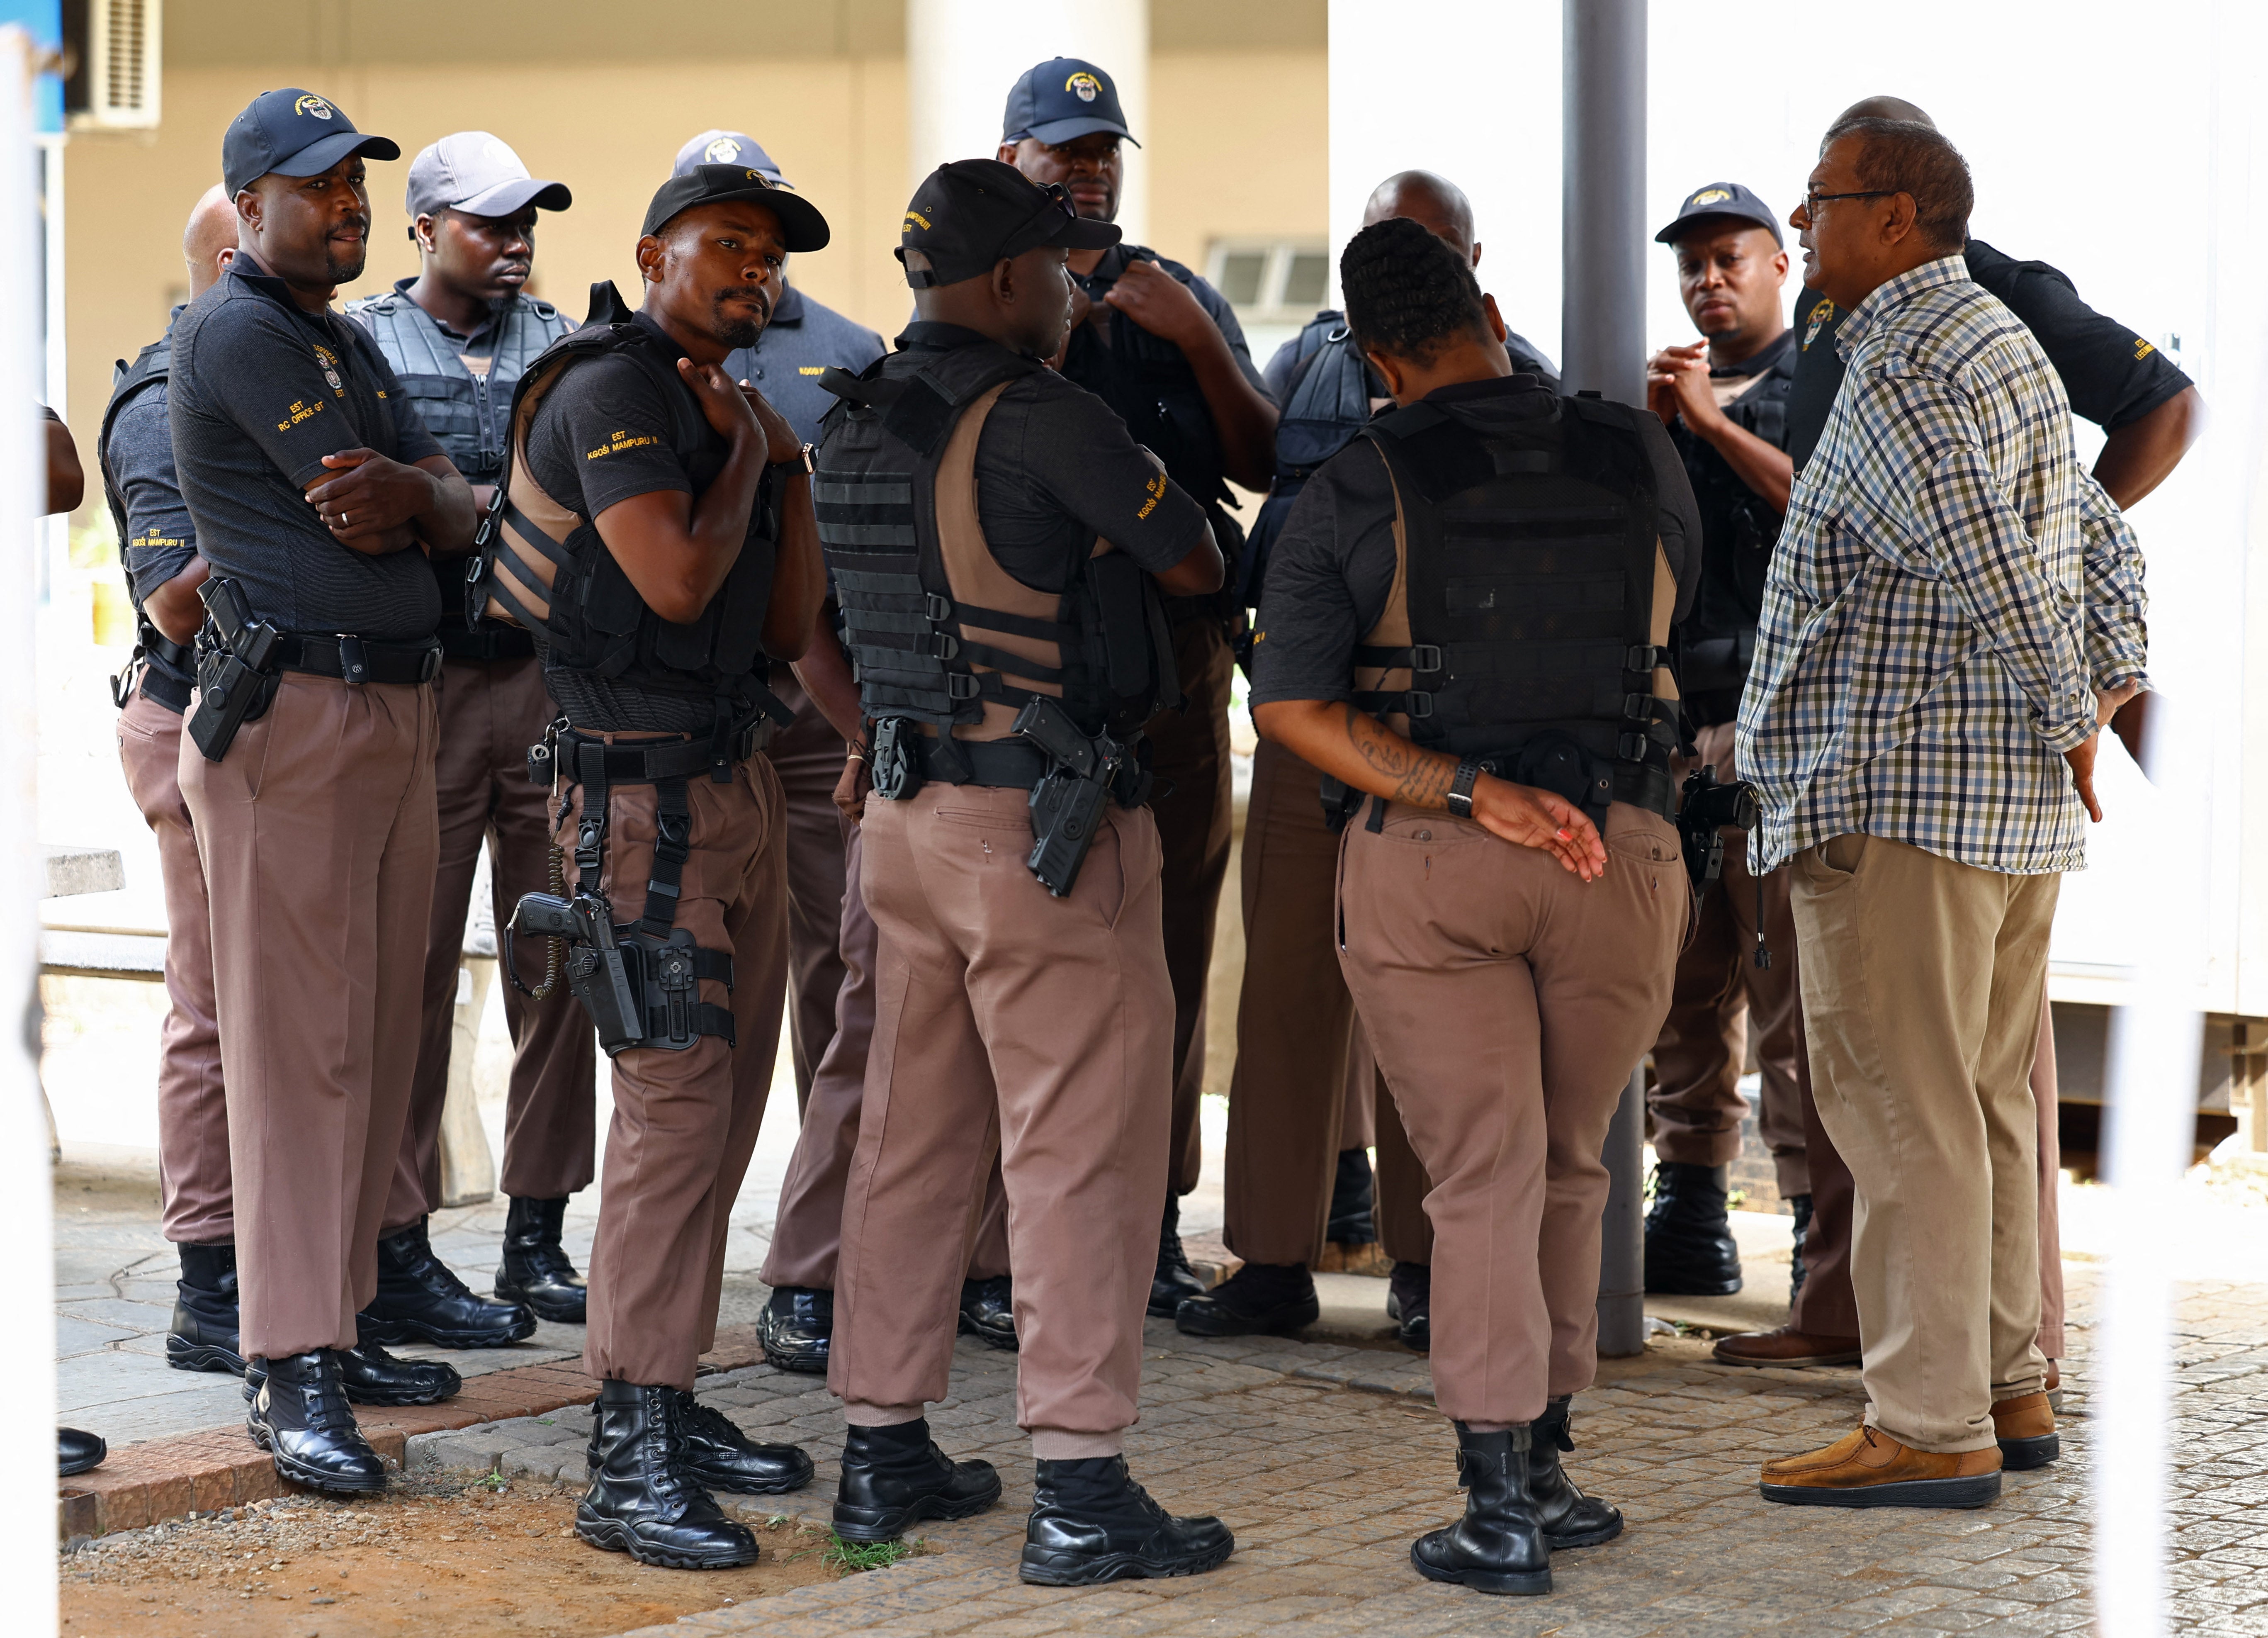 Correctional service emergency support team members look on at the entrance of the National head offices of the correctional services, where parolees are processed